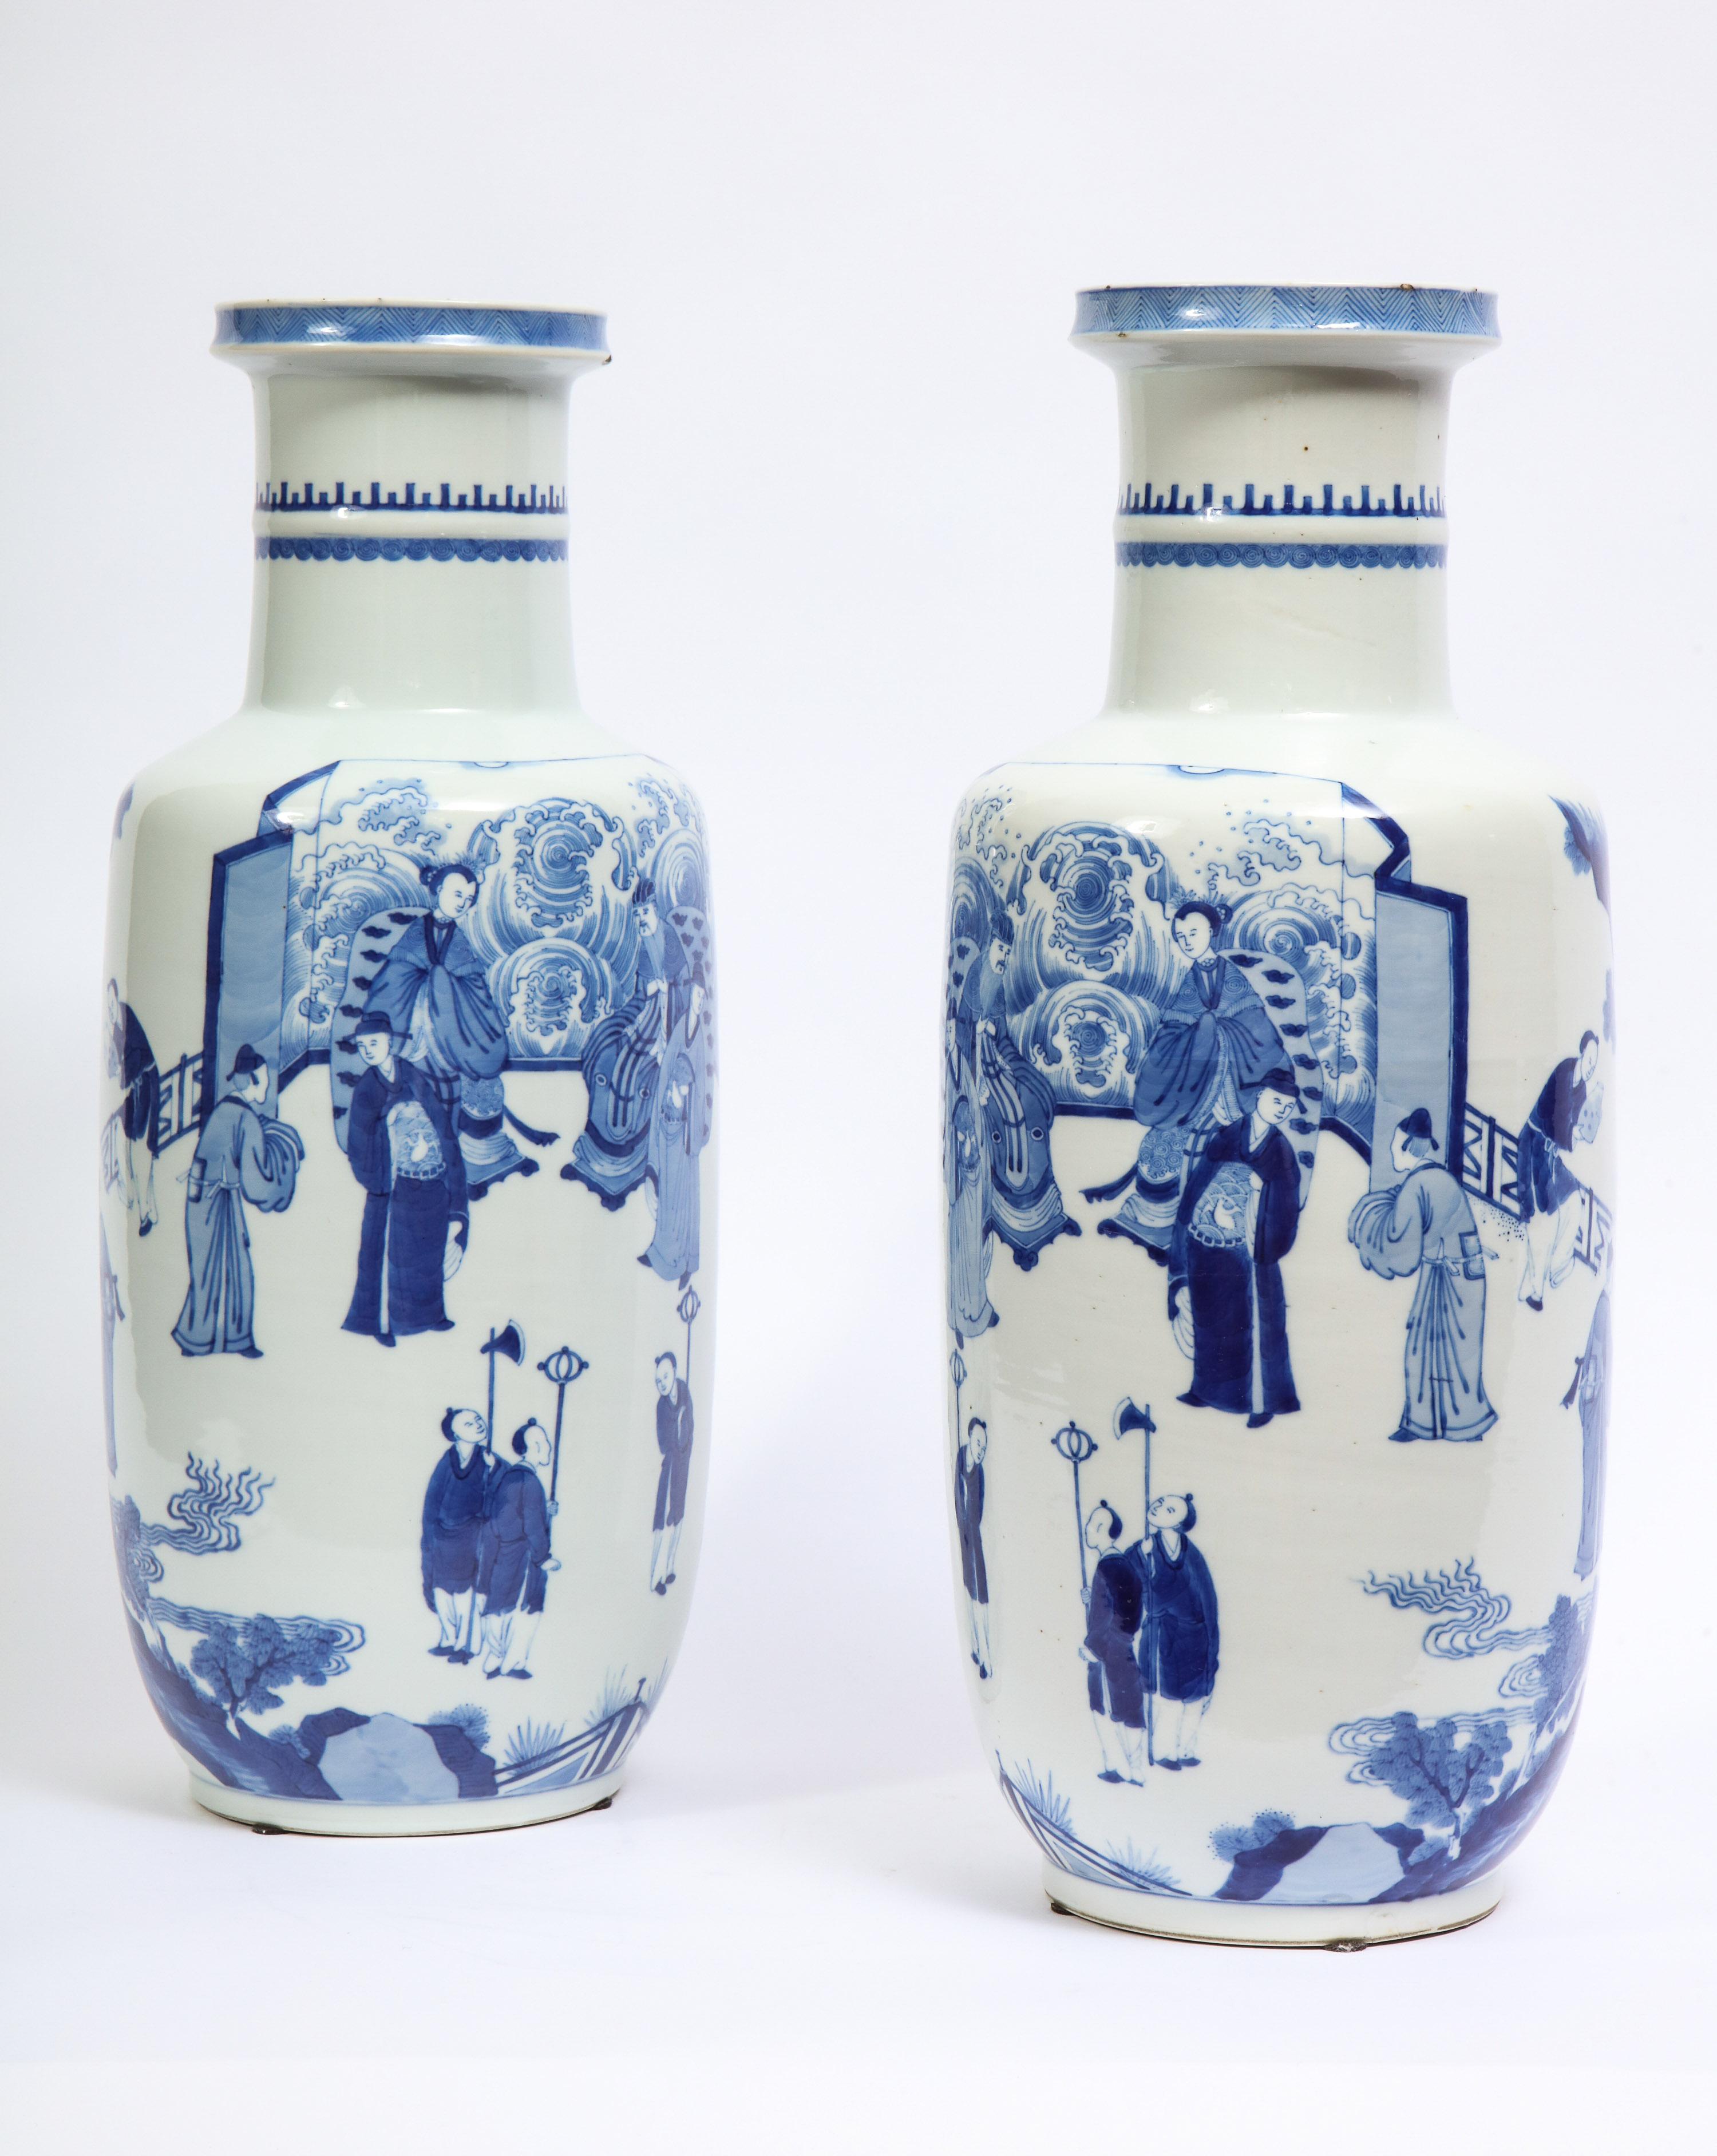 Hand-Painted 19th Century Blue & White Chinese Porcelain Bangchui Ping Form Vases, Pair For Sale